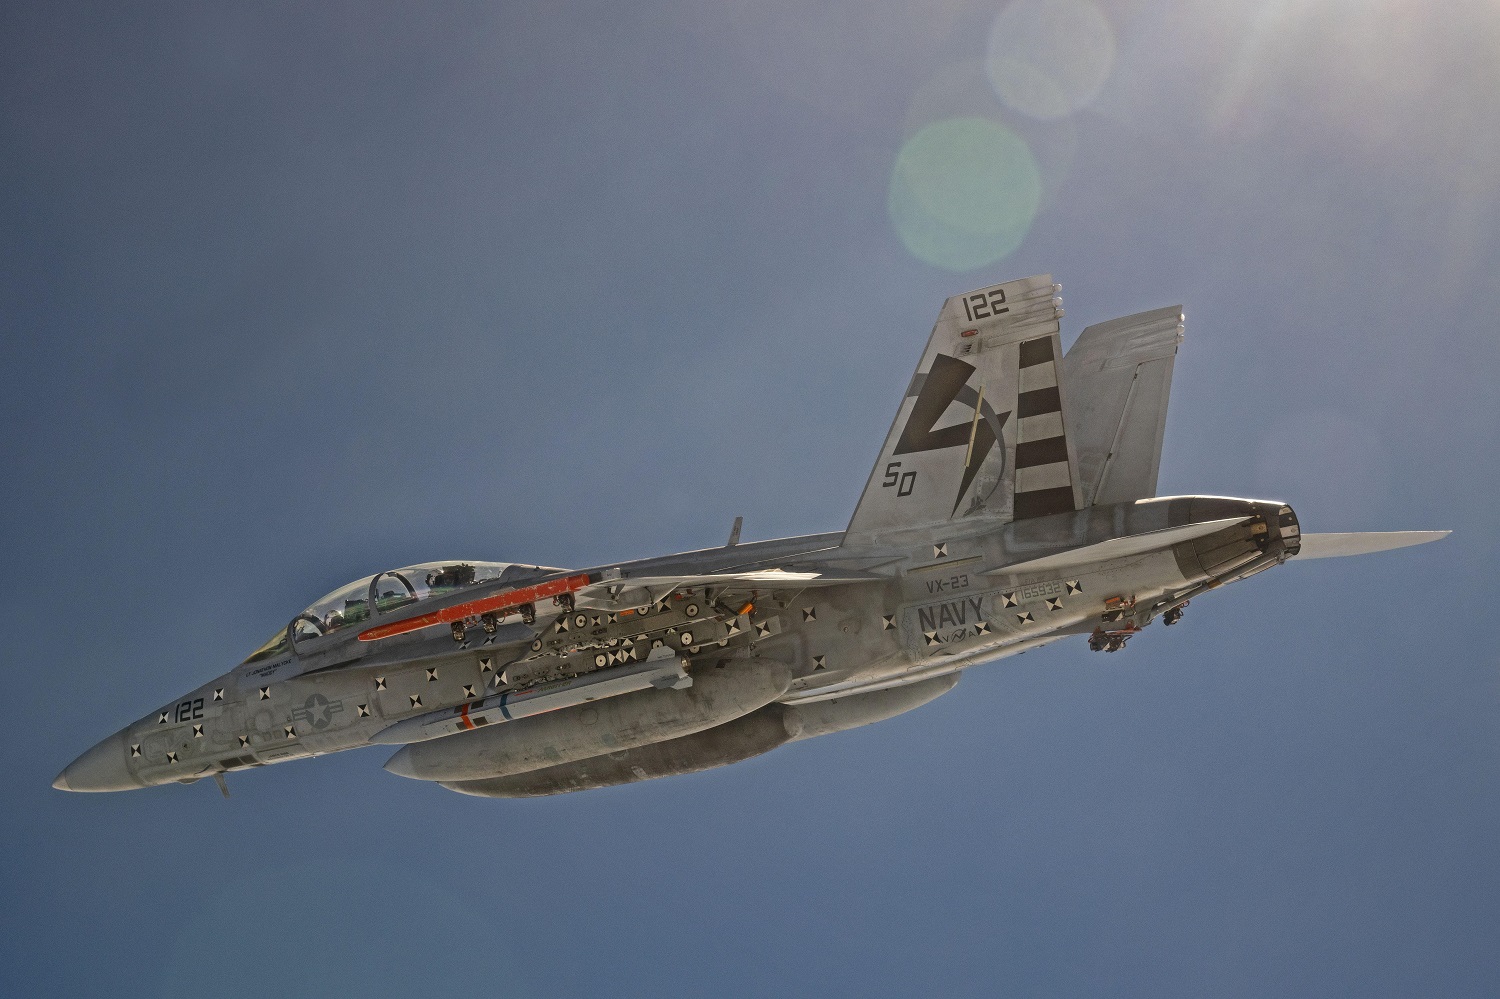 US Navy Completes F/A-18 Flight with Advanced Anti-Radiation Guided Missile - Extended Range (AARGM-ER)